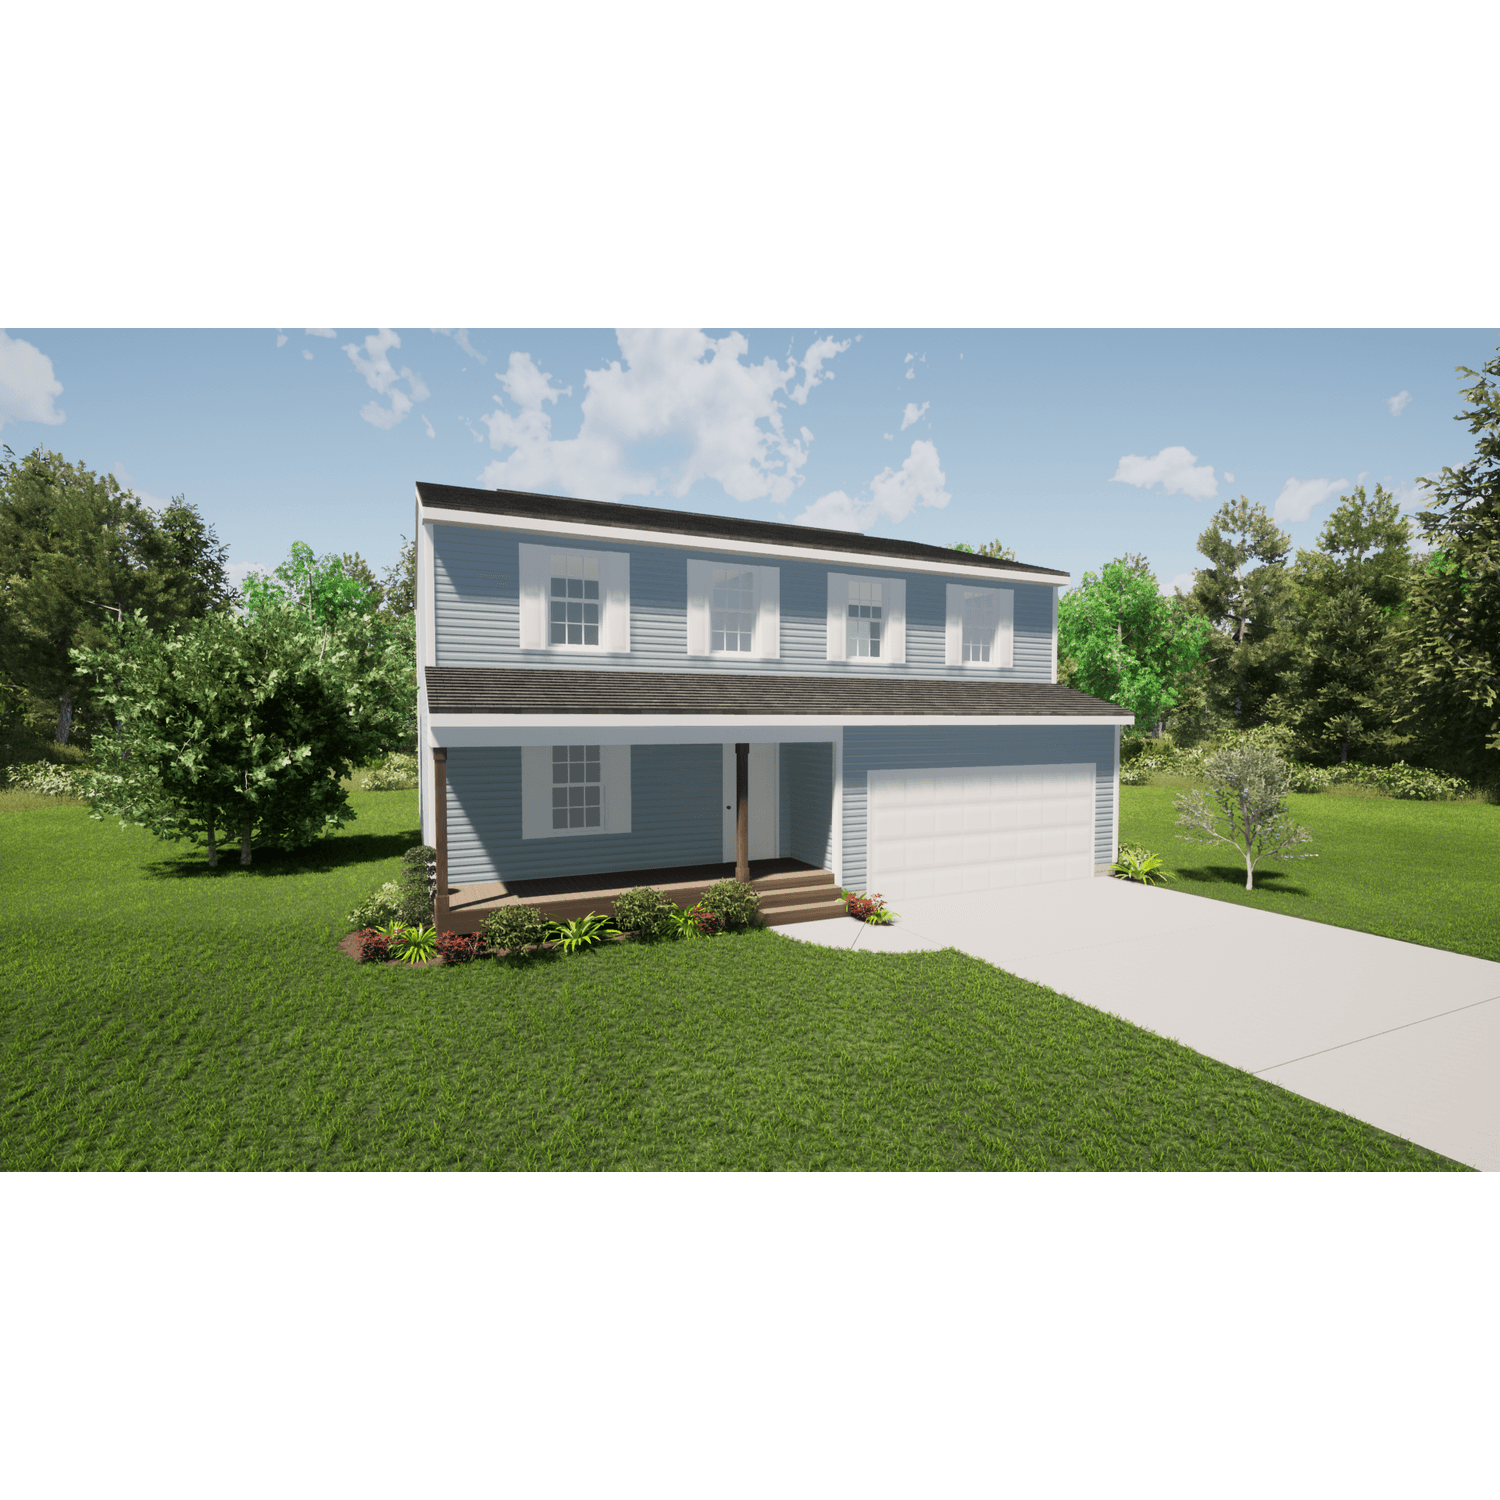 2. Valuebuild Homes - Rocky Mount - Build On Your Lot